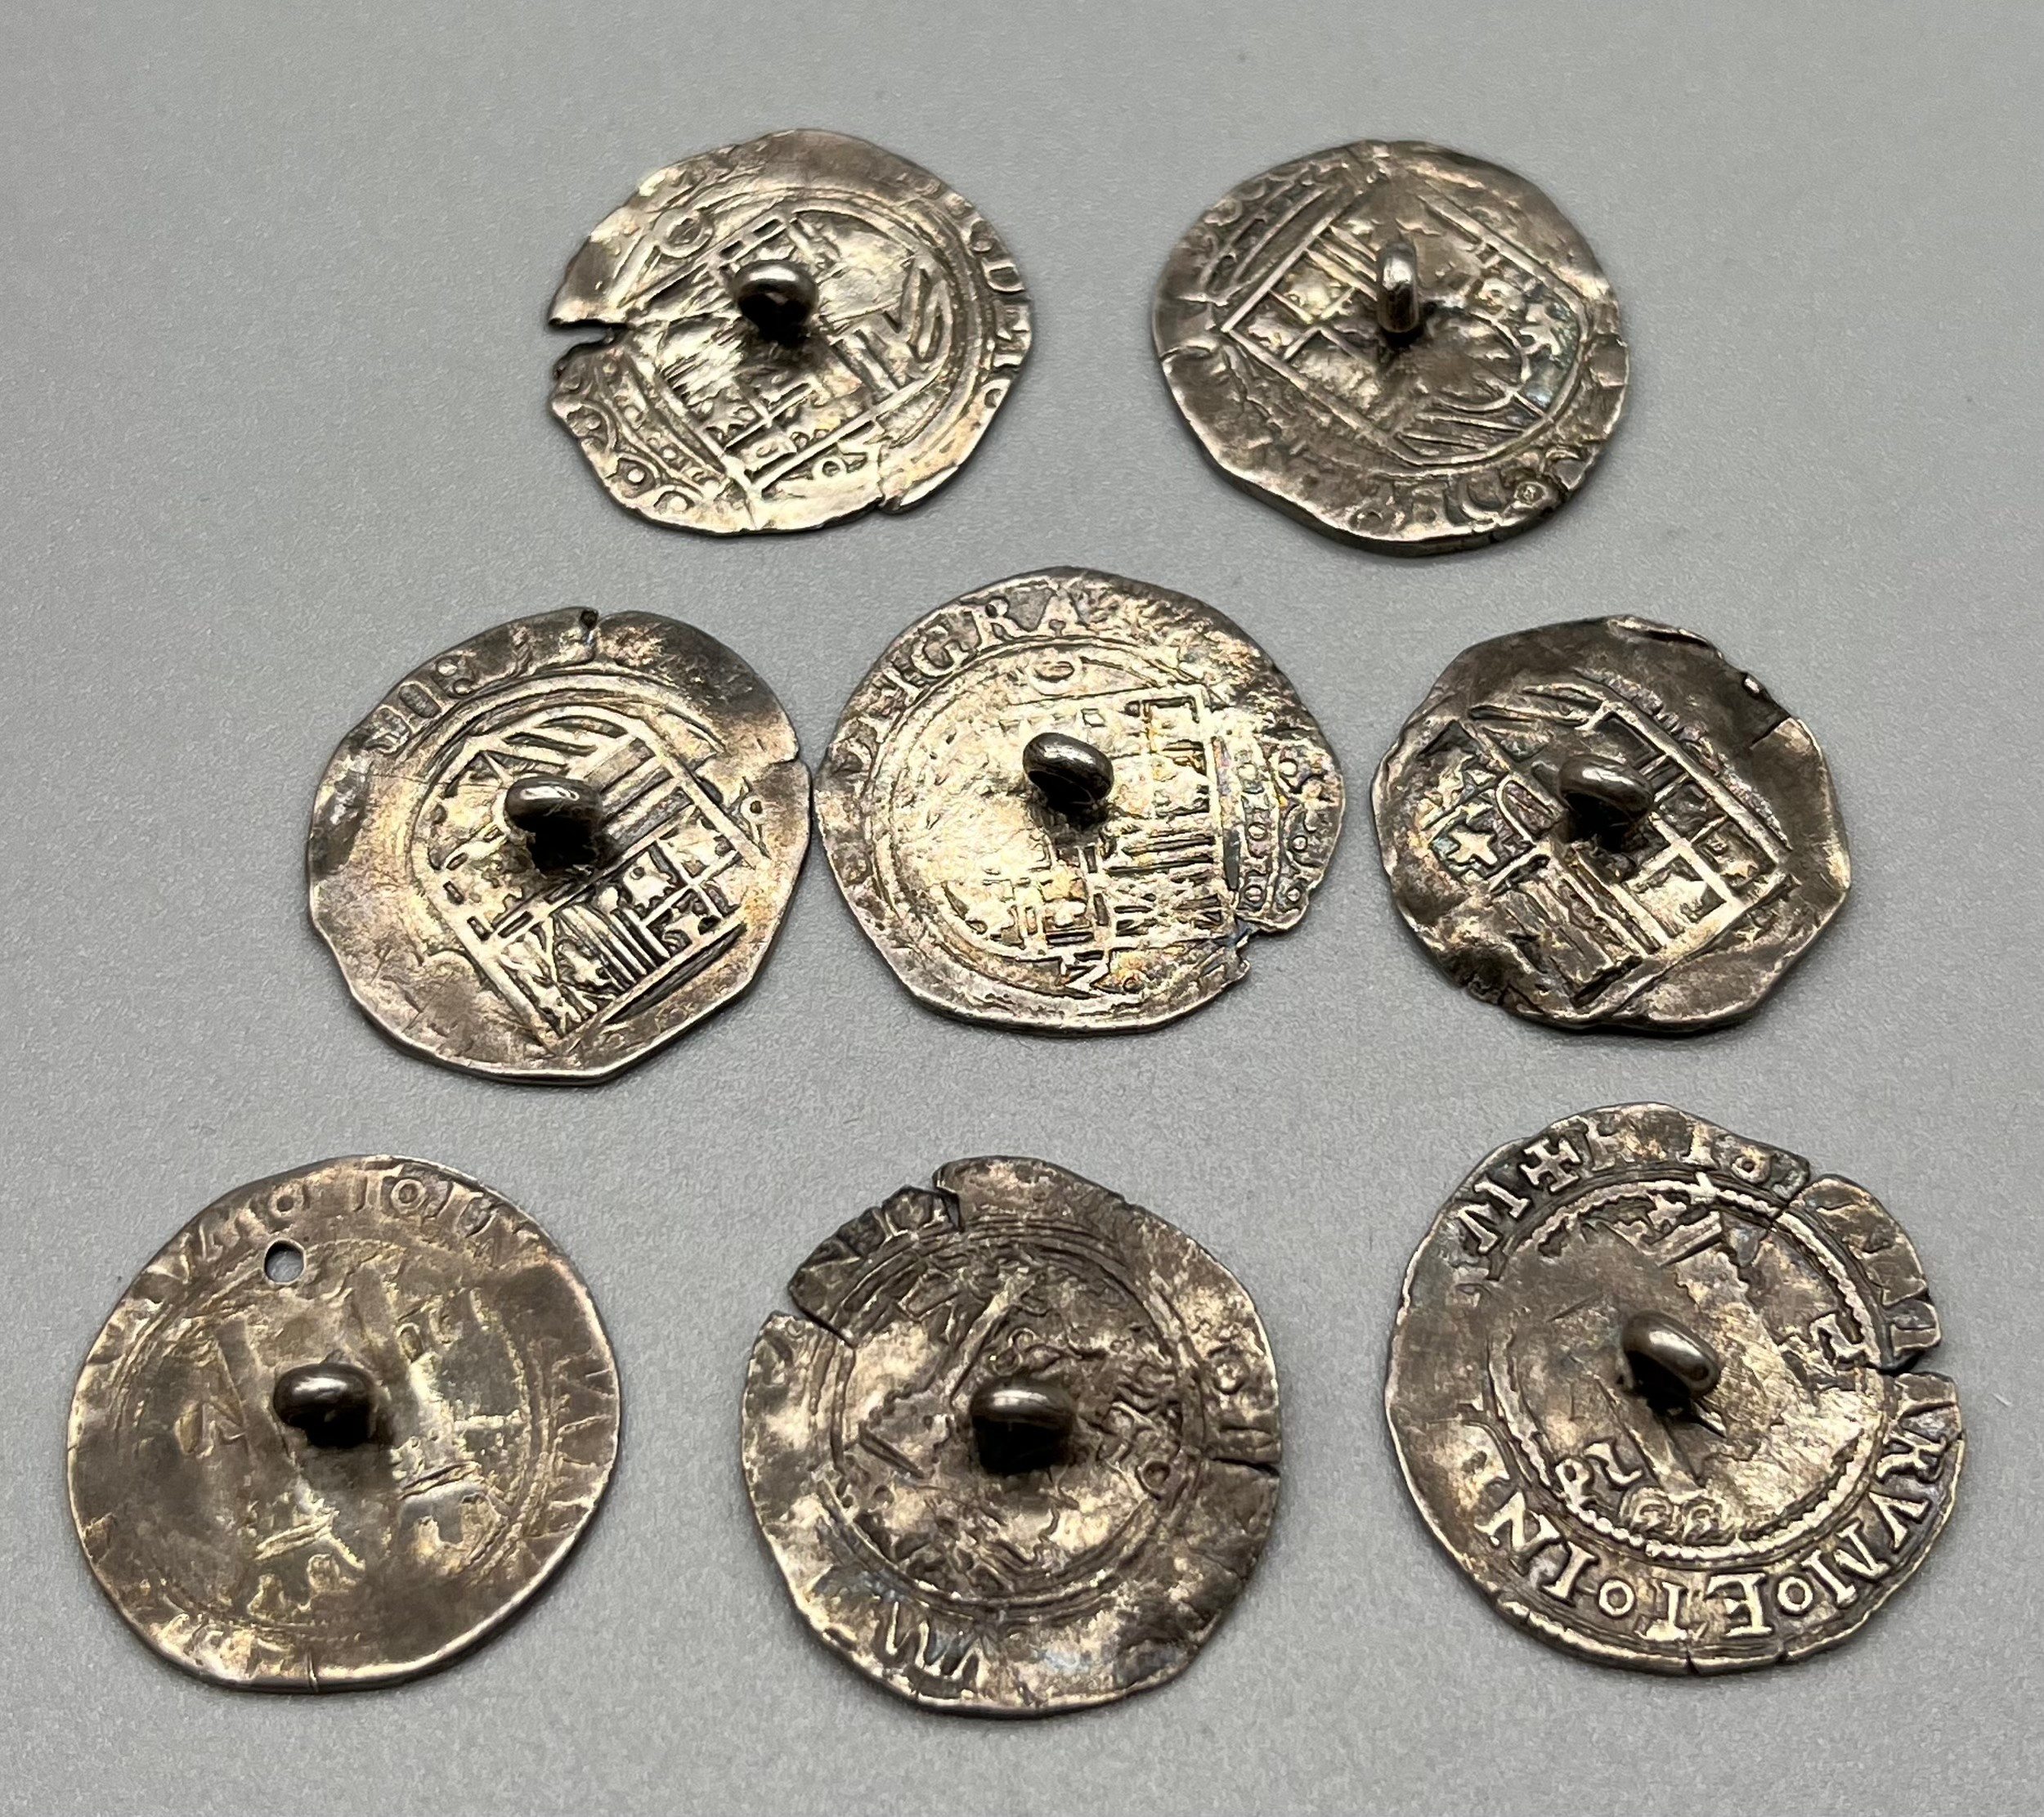 Group of Spanish 16th century Silver Real coins, mounted as buttons - Image 4 of 4